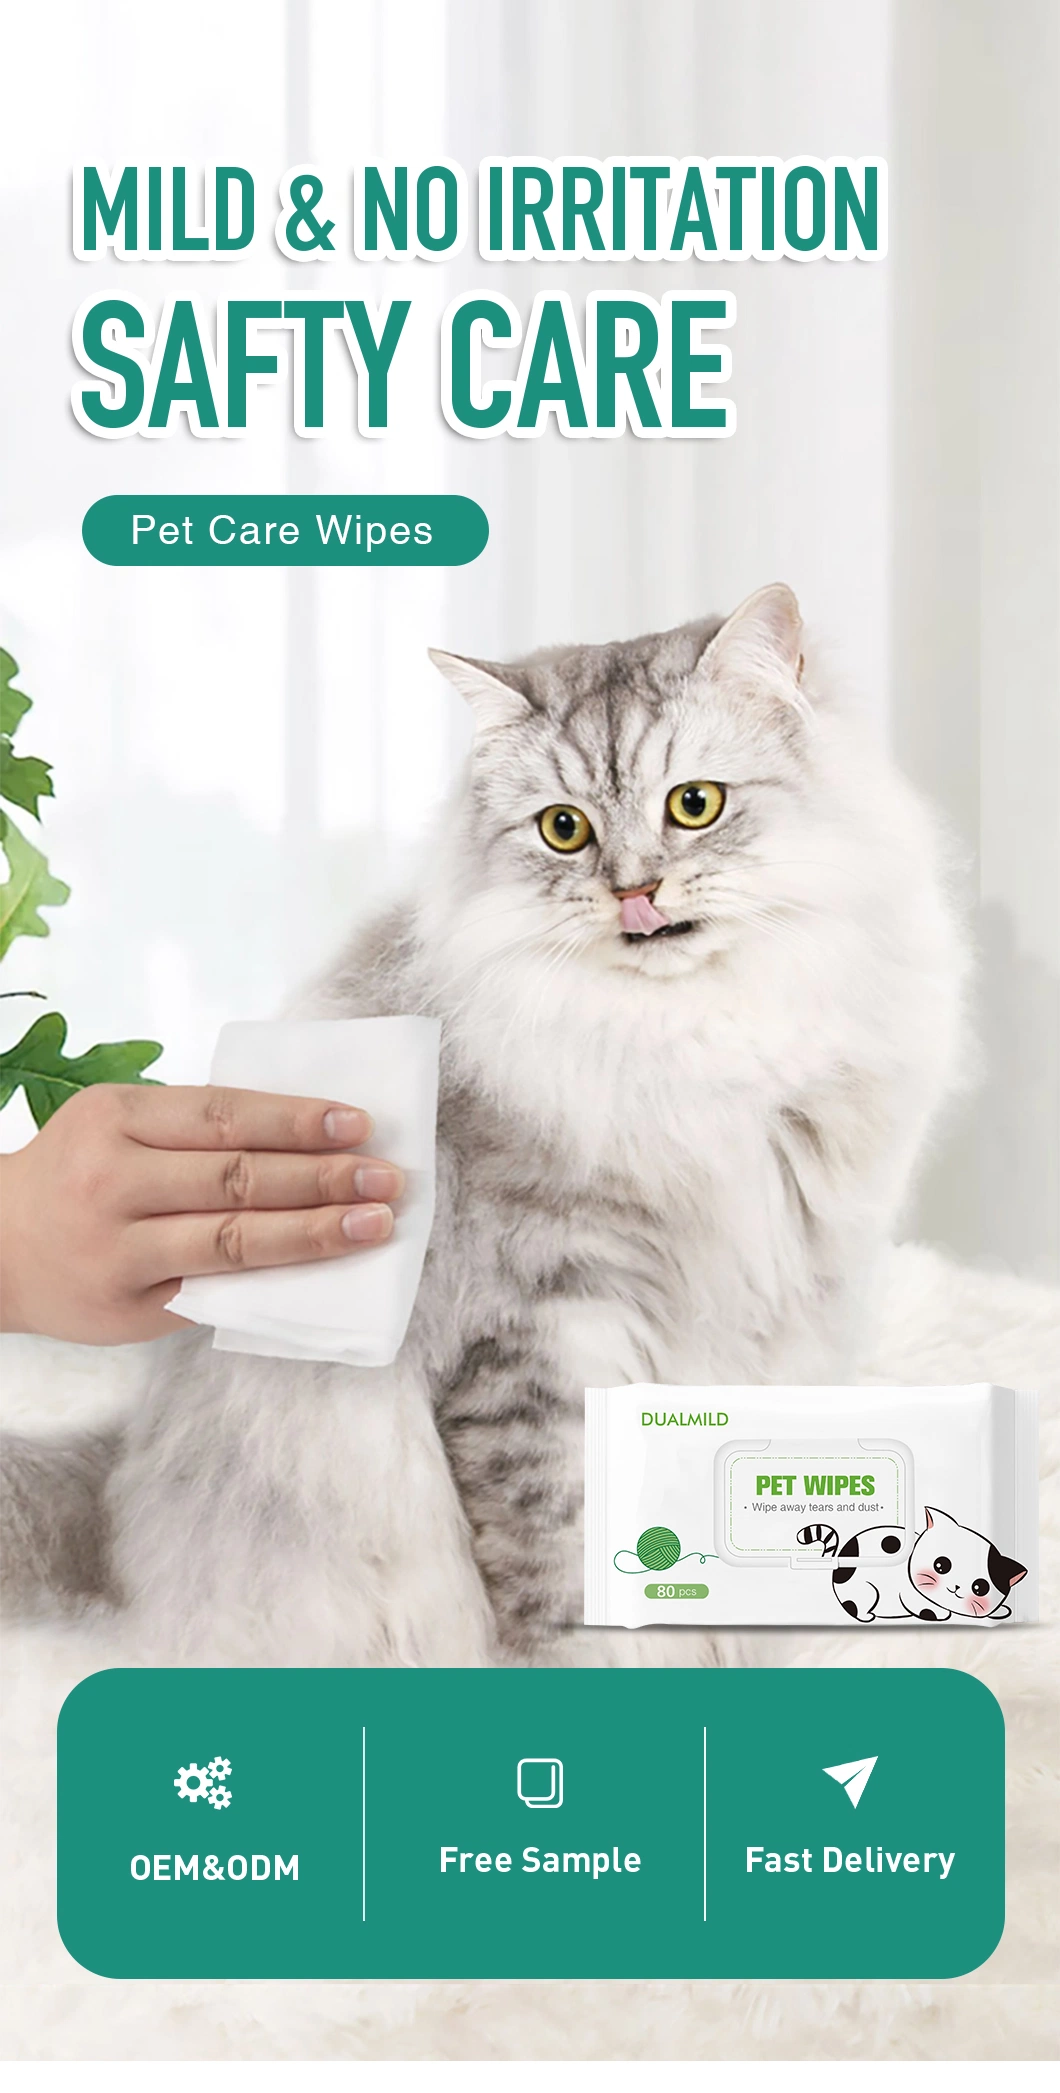 OEM Pet Wipes 100% Natural Plant Based with Organic Antioxidants